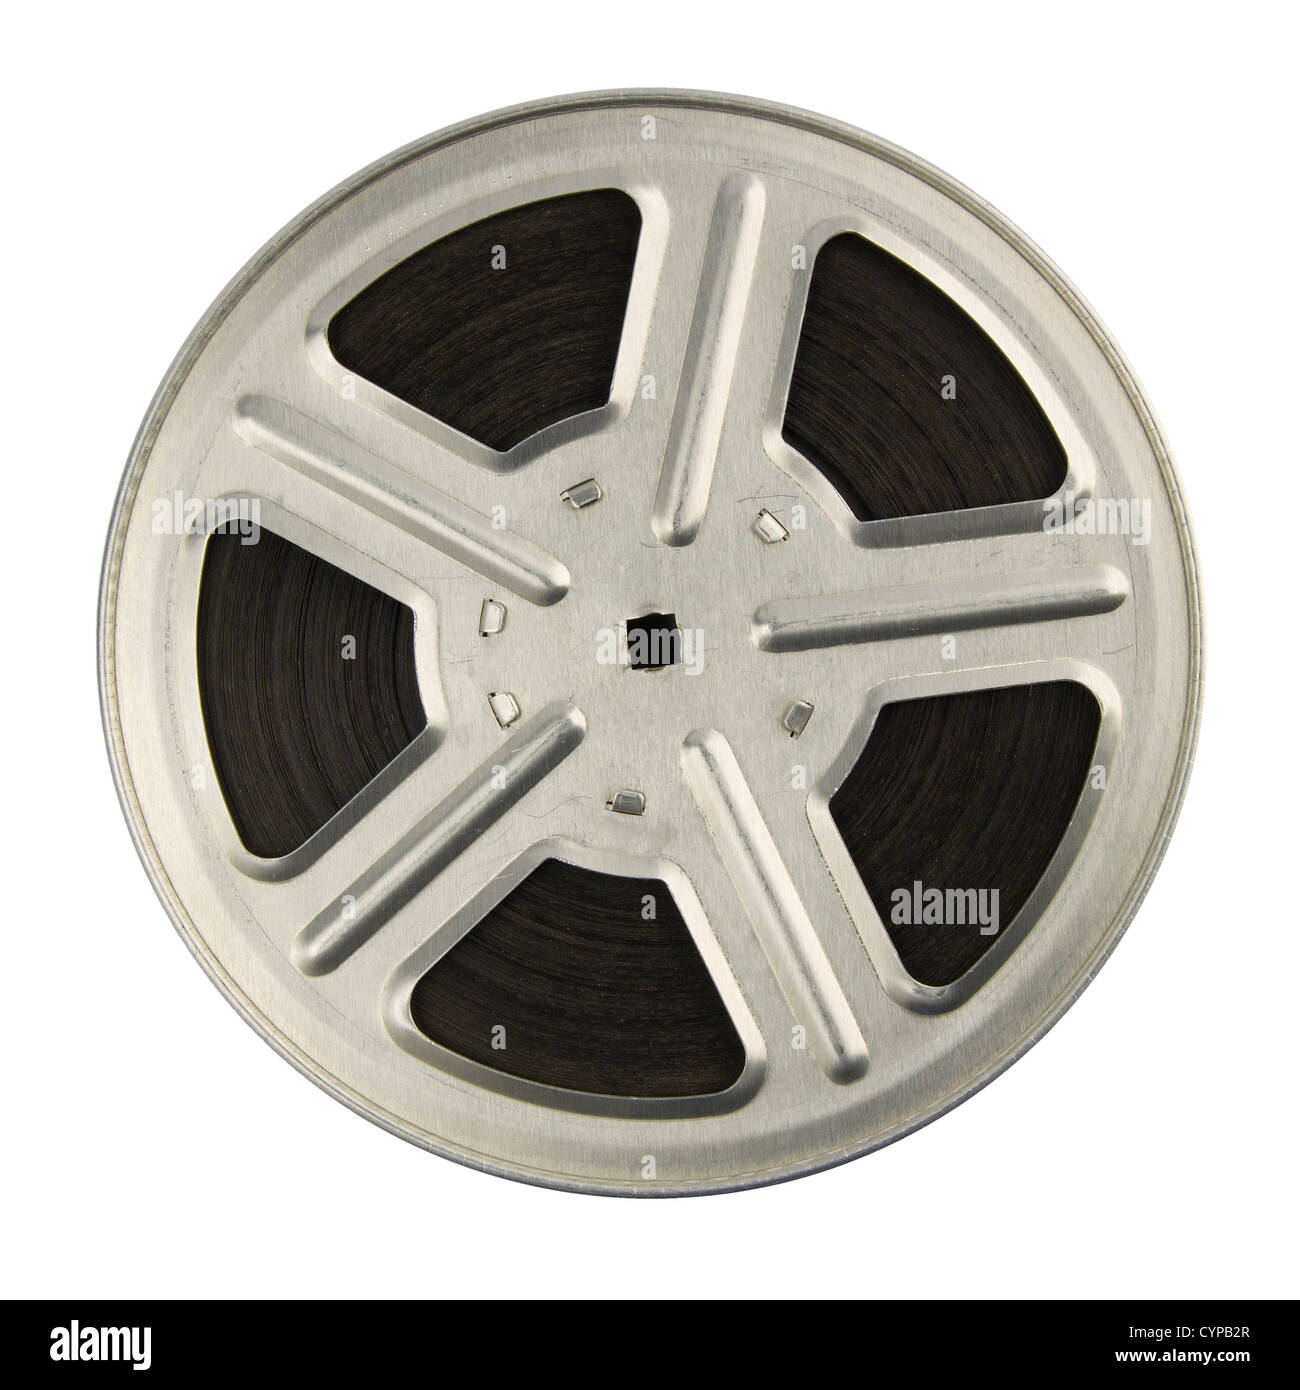 16 mm motion picture film reel, isolated on white background Stock Photo -  Alamy